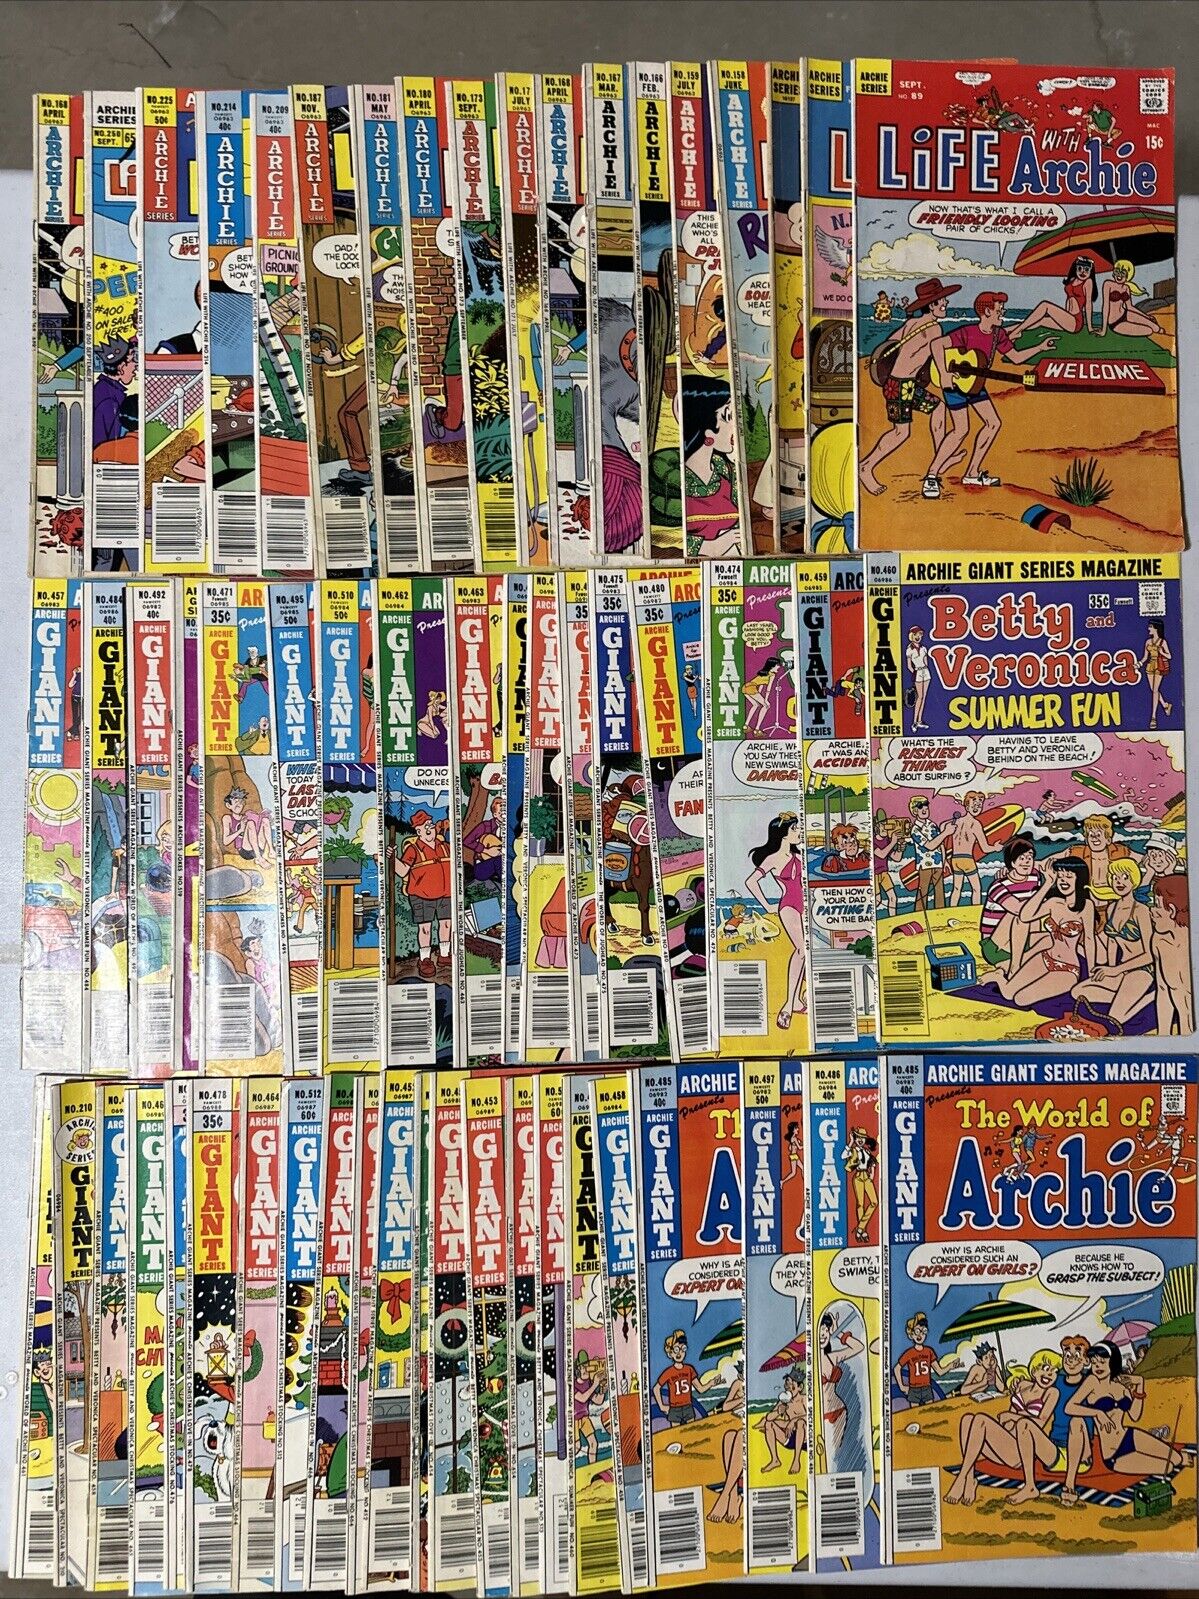 Archie Comics Huge Lot of 58 Comics Giant Series Life of ArchieSilver Bronze Age